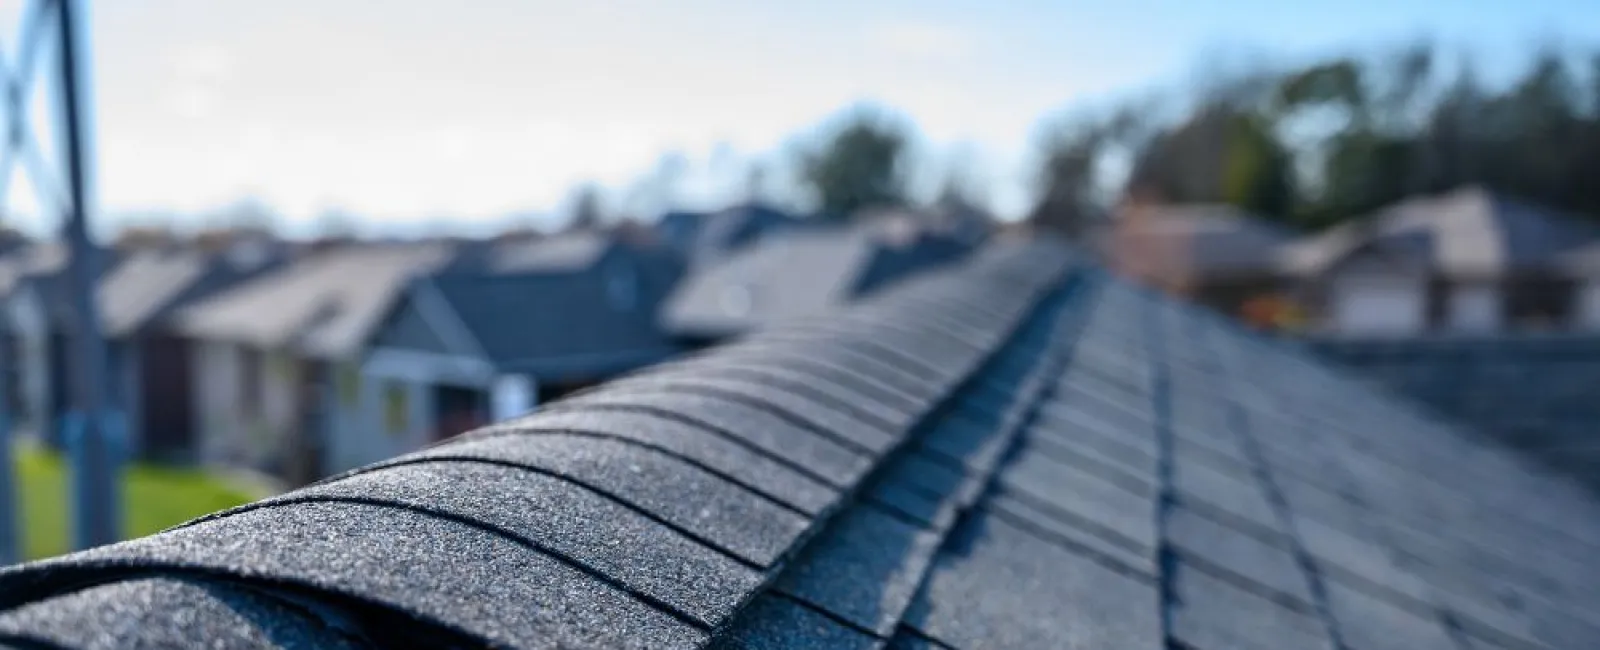 7 Telltale Signs It’s Time To Get a New Roof for Your Home